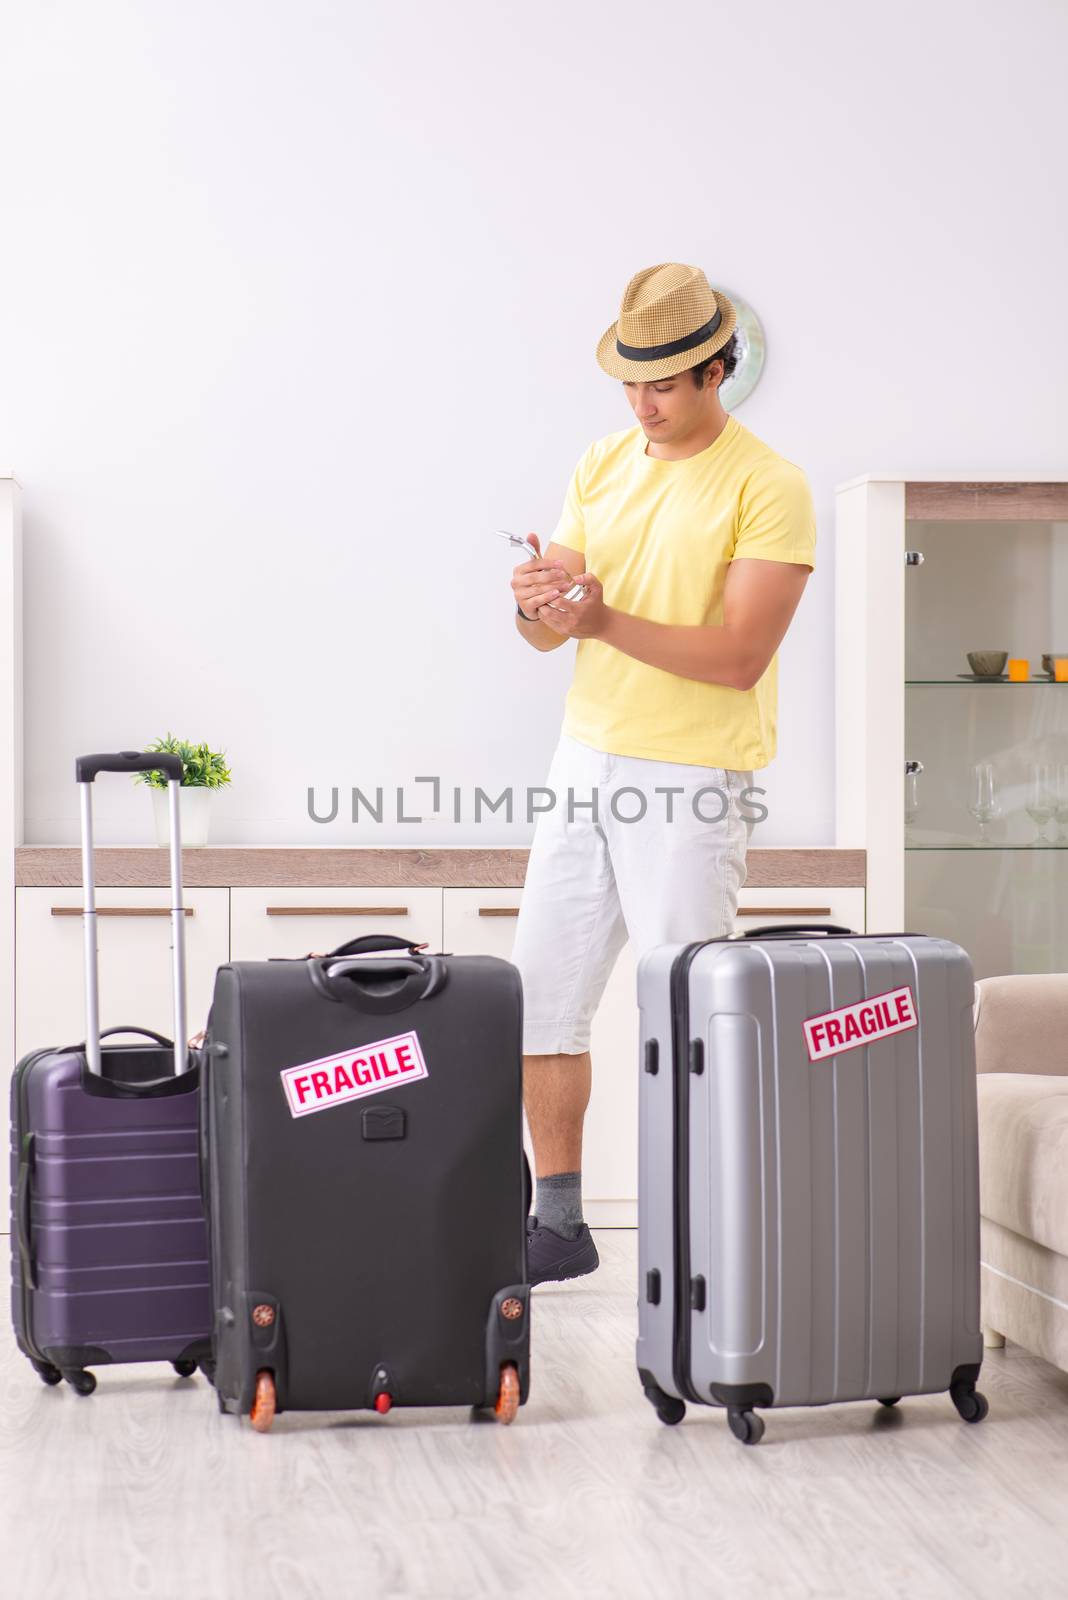 Man going on vacation with fragile suitcases by Elnur